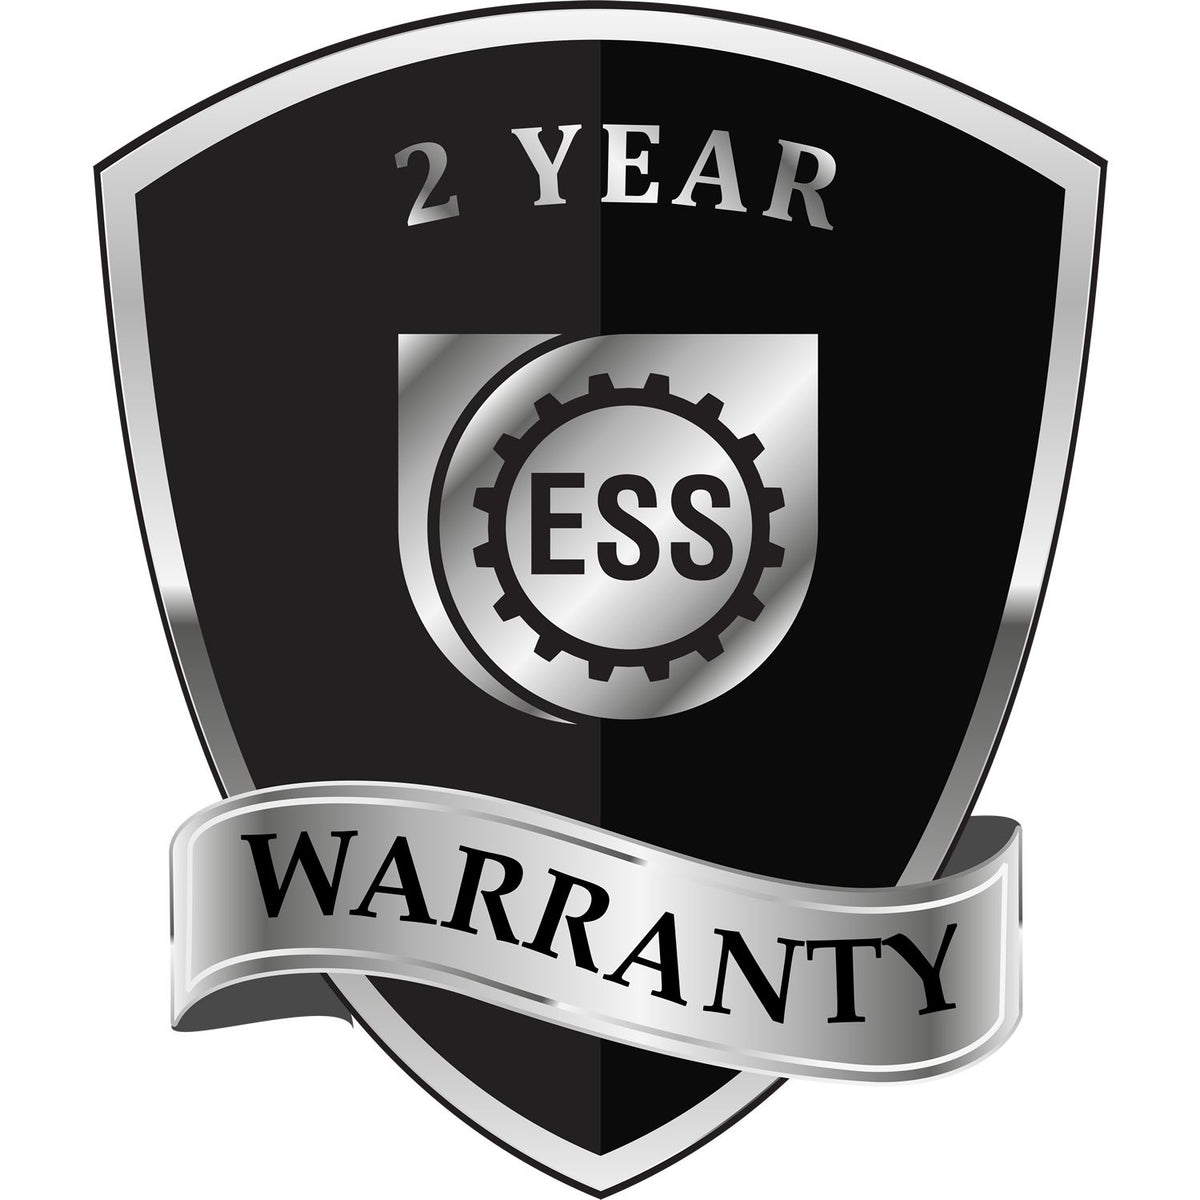 A black and silver badge or emblem showing warranty information for the State of Mississippi Extended Long Reach Geologist Seal